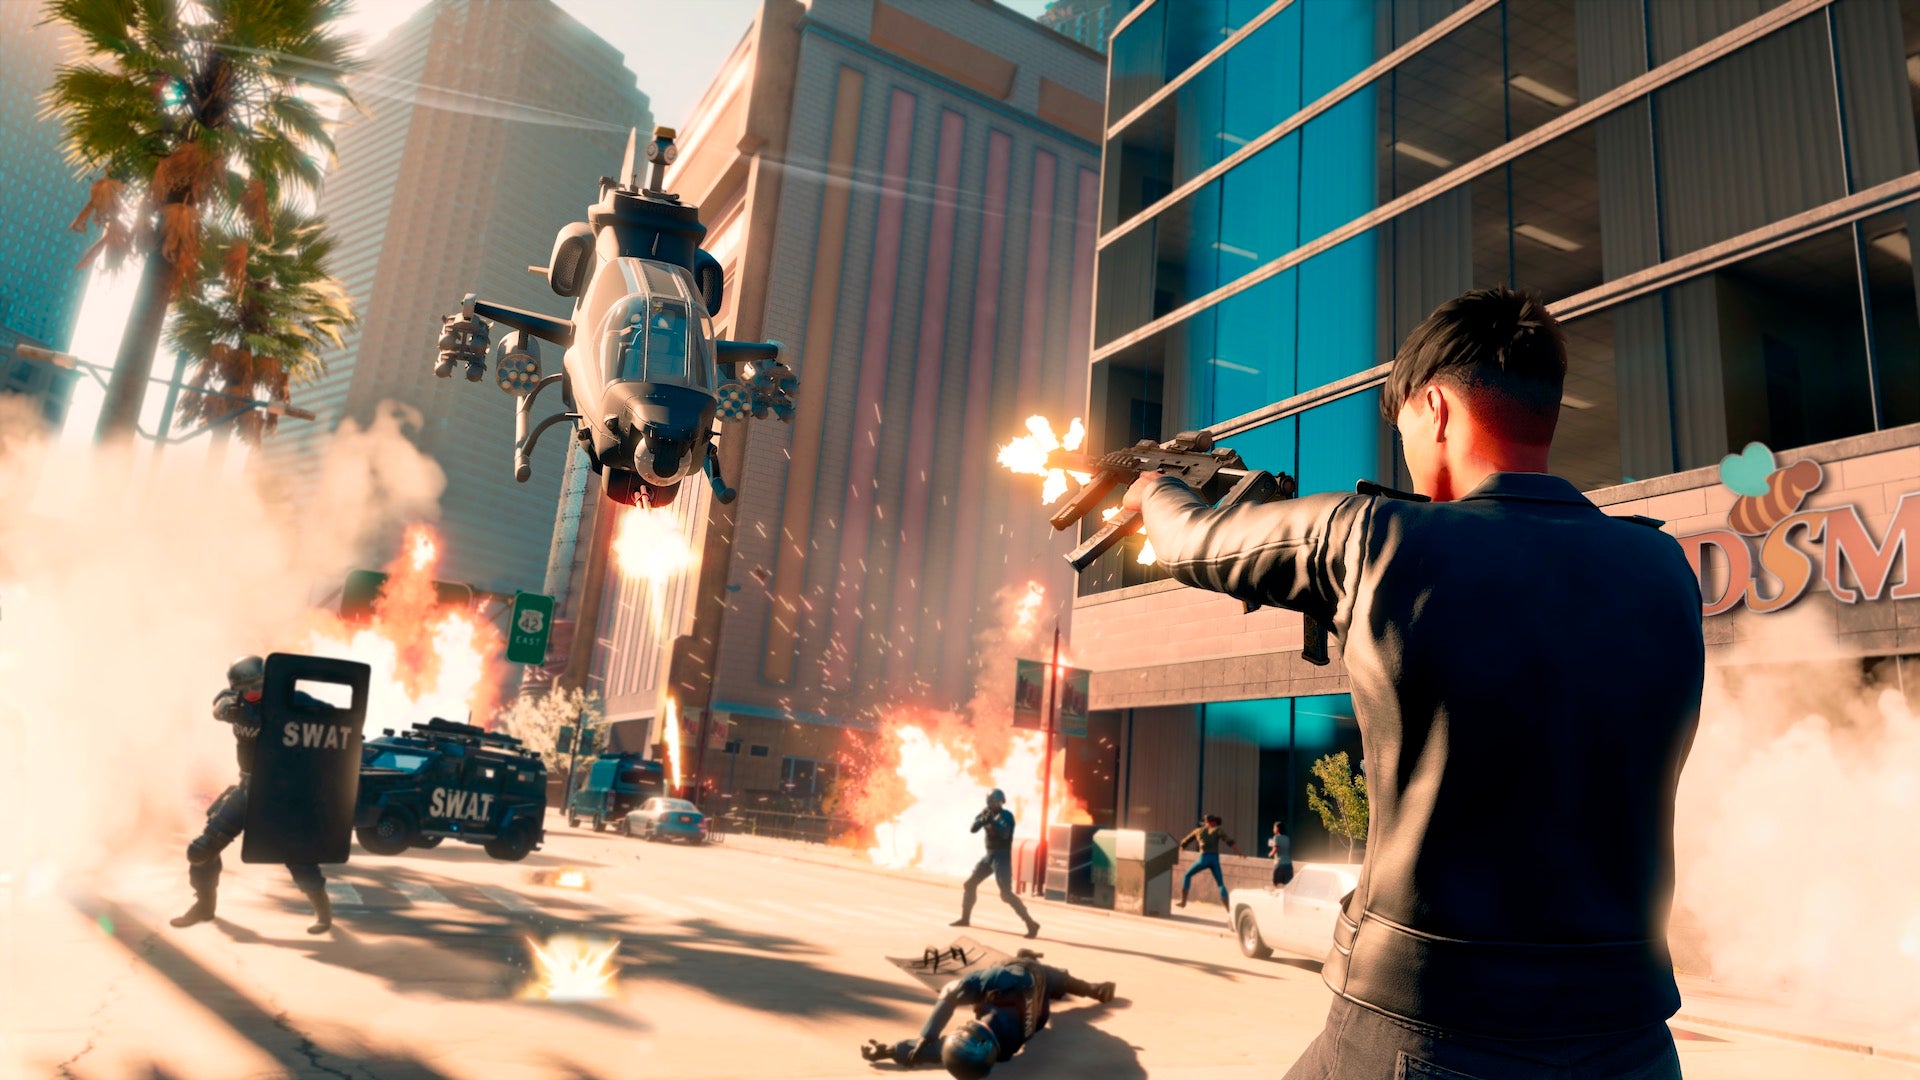 The player fires uzis at a helicopter while all-round chaos ensues in Saints Row.